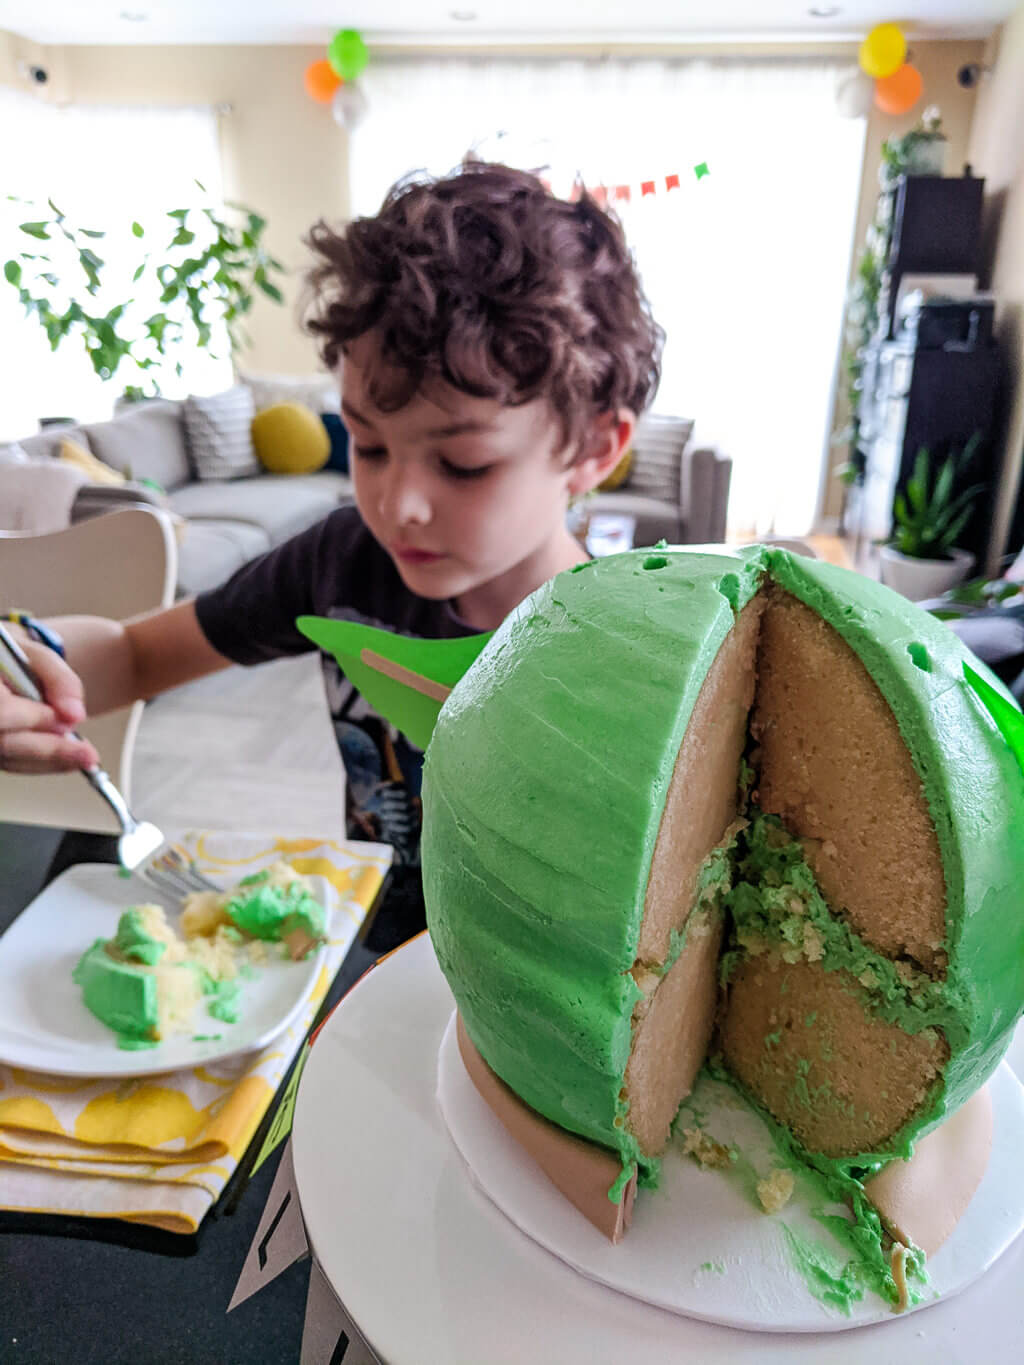 Liam eating a Mandalorian Baby Yoda birthday cake - Copyright Merriment Design Co. Do Not Distribute without written permission.